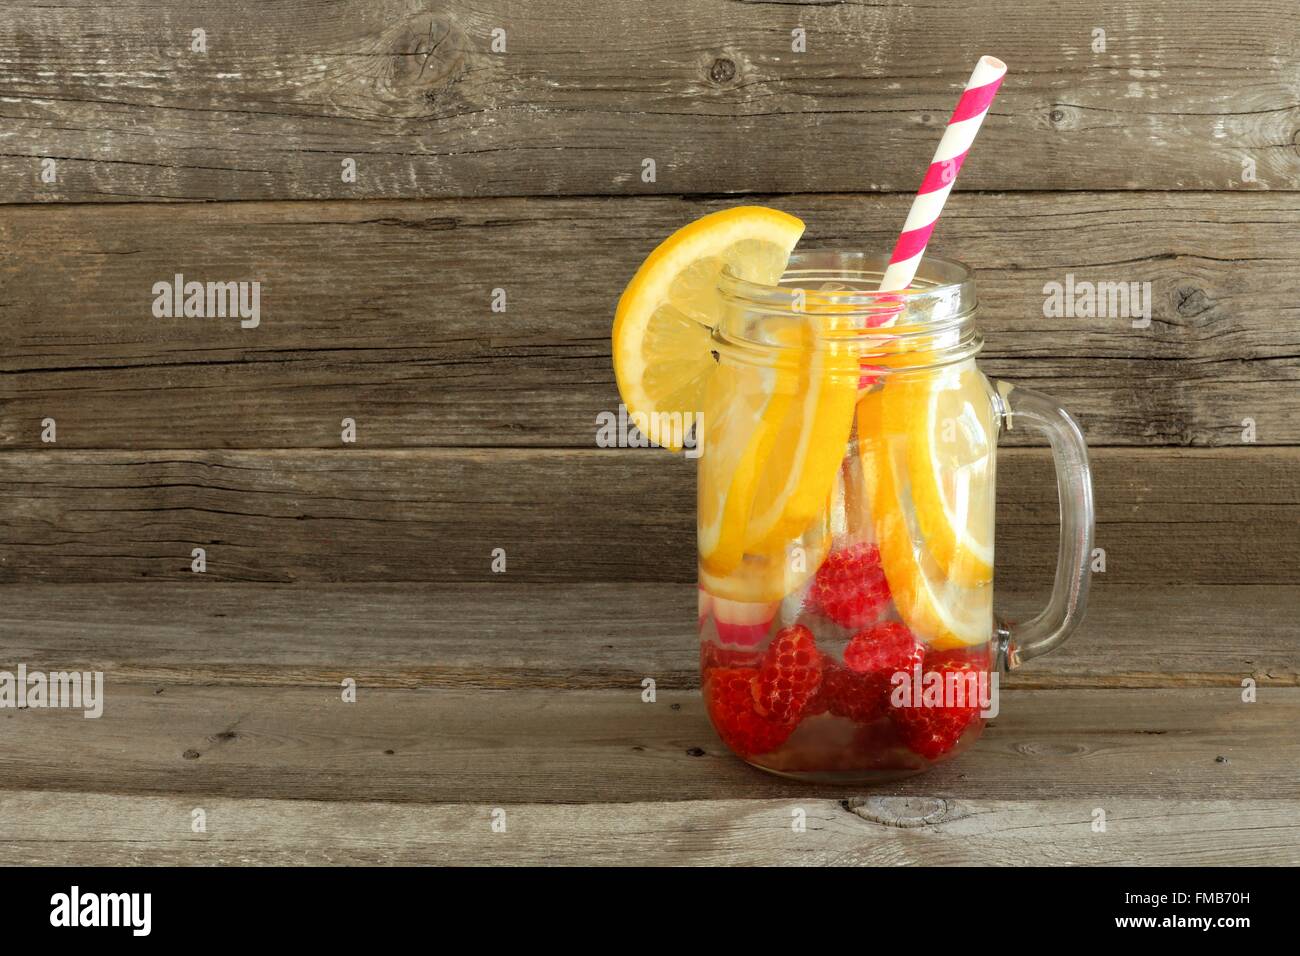 Detox water with lemon and raspberries in a mason jar with straw against a wood background Stock Photo